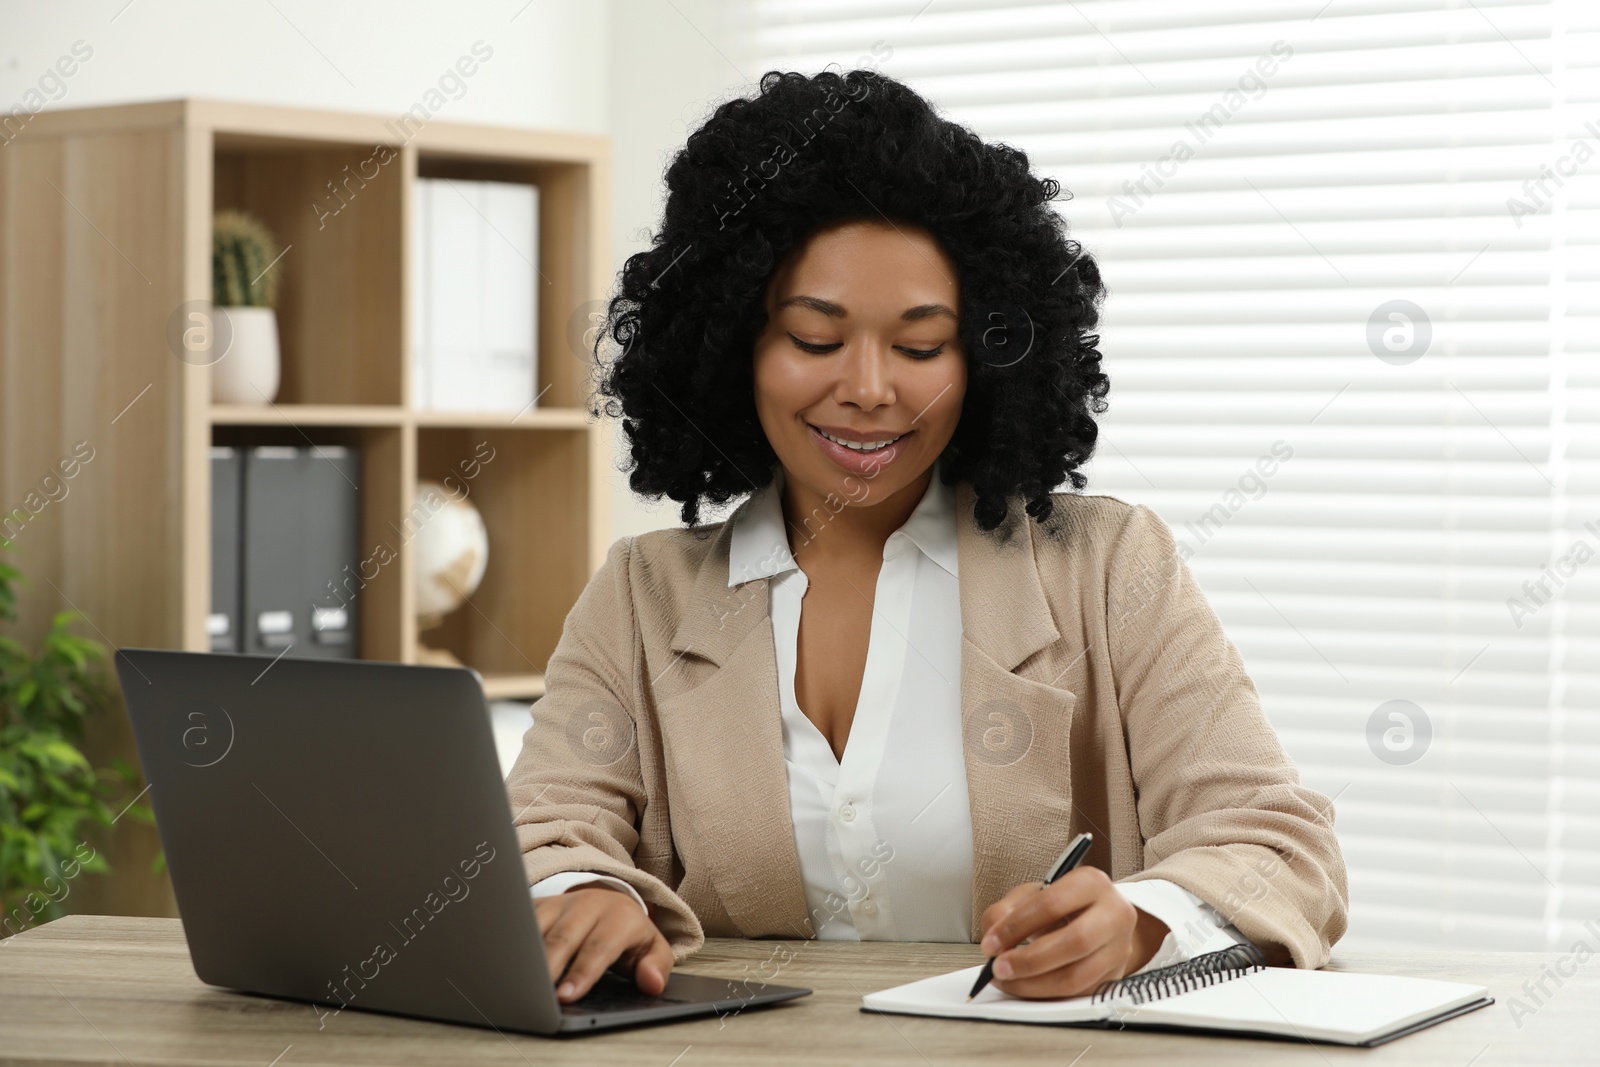 Photo of Happy young woman writing notes while using laptop at wooden desk indoors